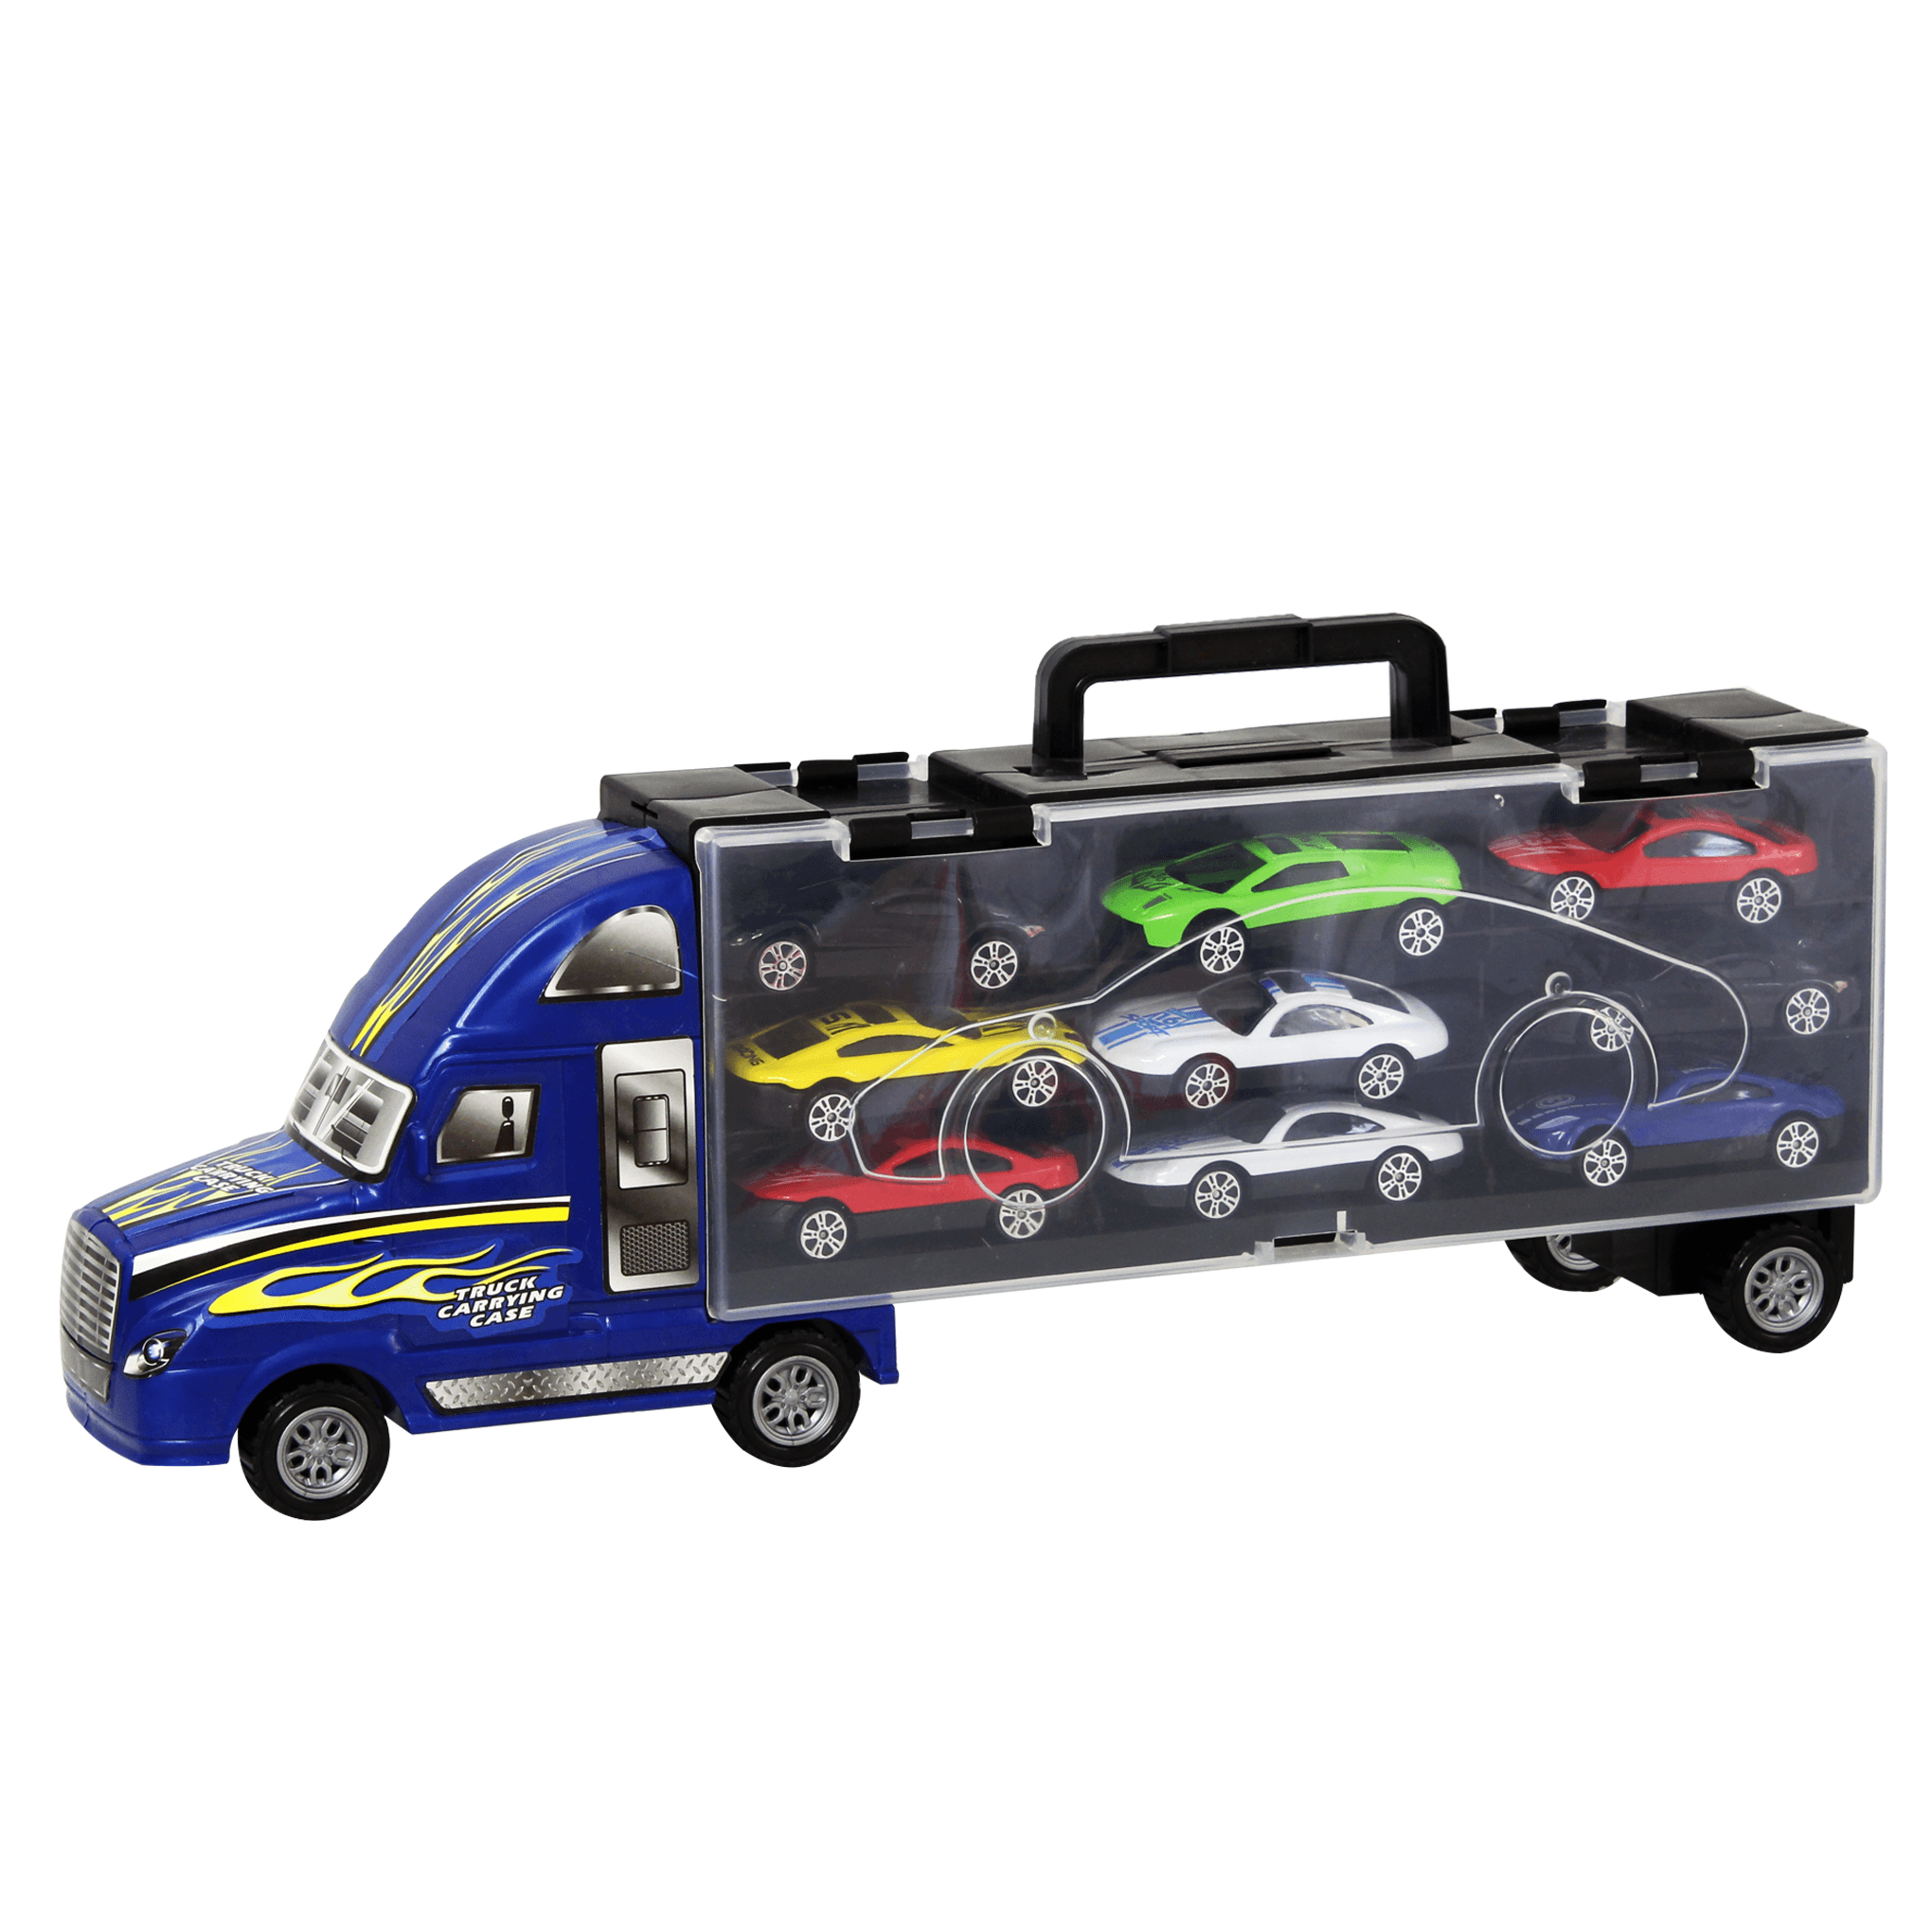 Die Cast Plastic Car Carrier Truck Toy And 9 Mini Cars Play Set - Blue - BumbleToys - 6+ Years, 8-13 Years, Boys, Cars, Collectible Vehicles, Girls, Toy Land, Truck